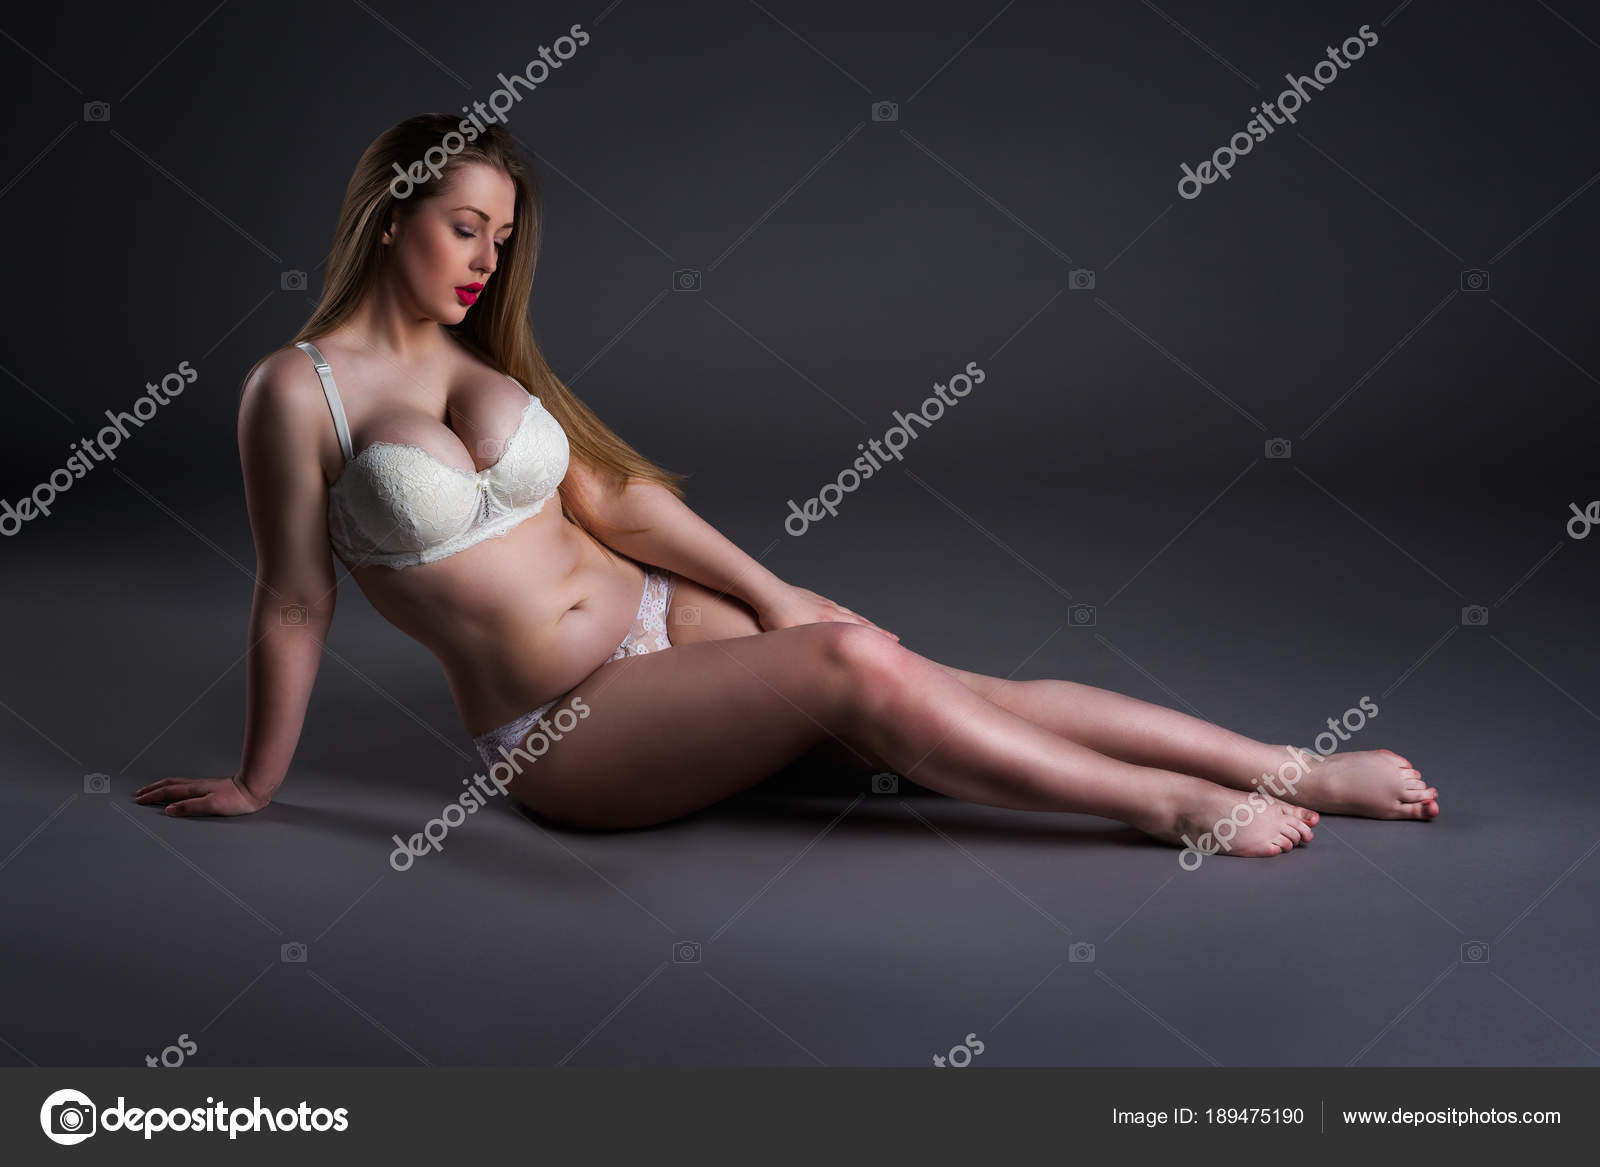 Blonde fat girl in lingerie Plus Size Sexy Model In White Underwear Fat Woman Sitting On Gray Background Overweight Female Body Stock Photo By C Starast 189475190